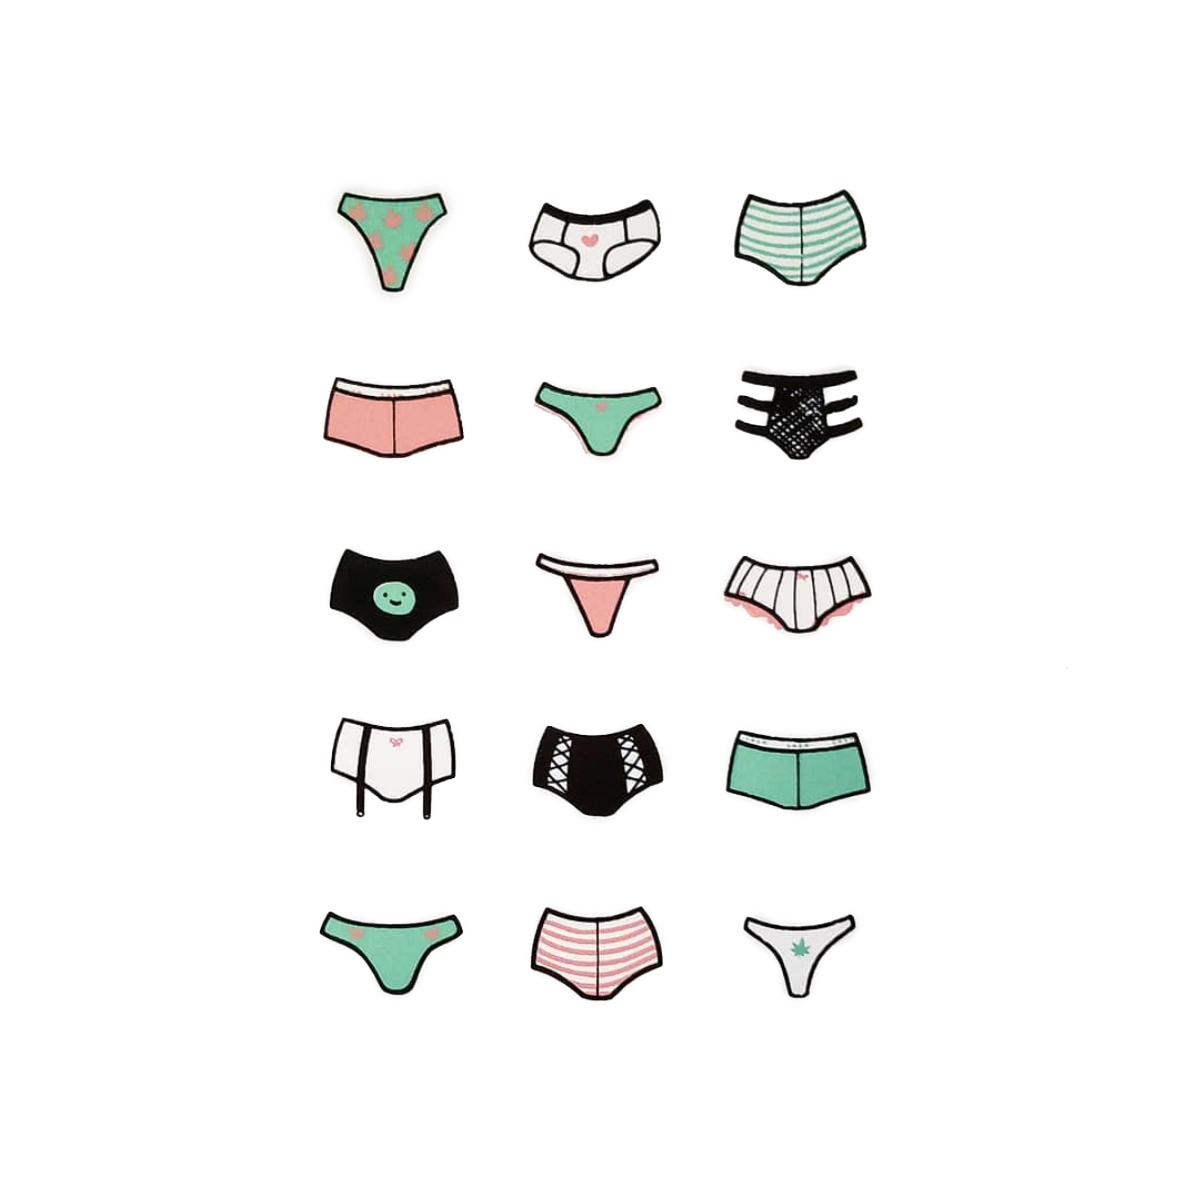 A screenprinted poster of 15 various icons of women's underwear. They are laid out in a grid on a white background.